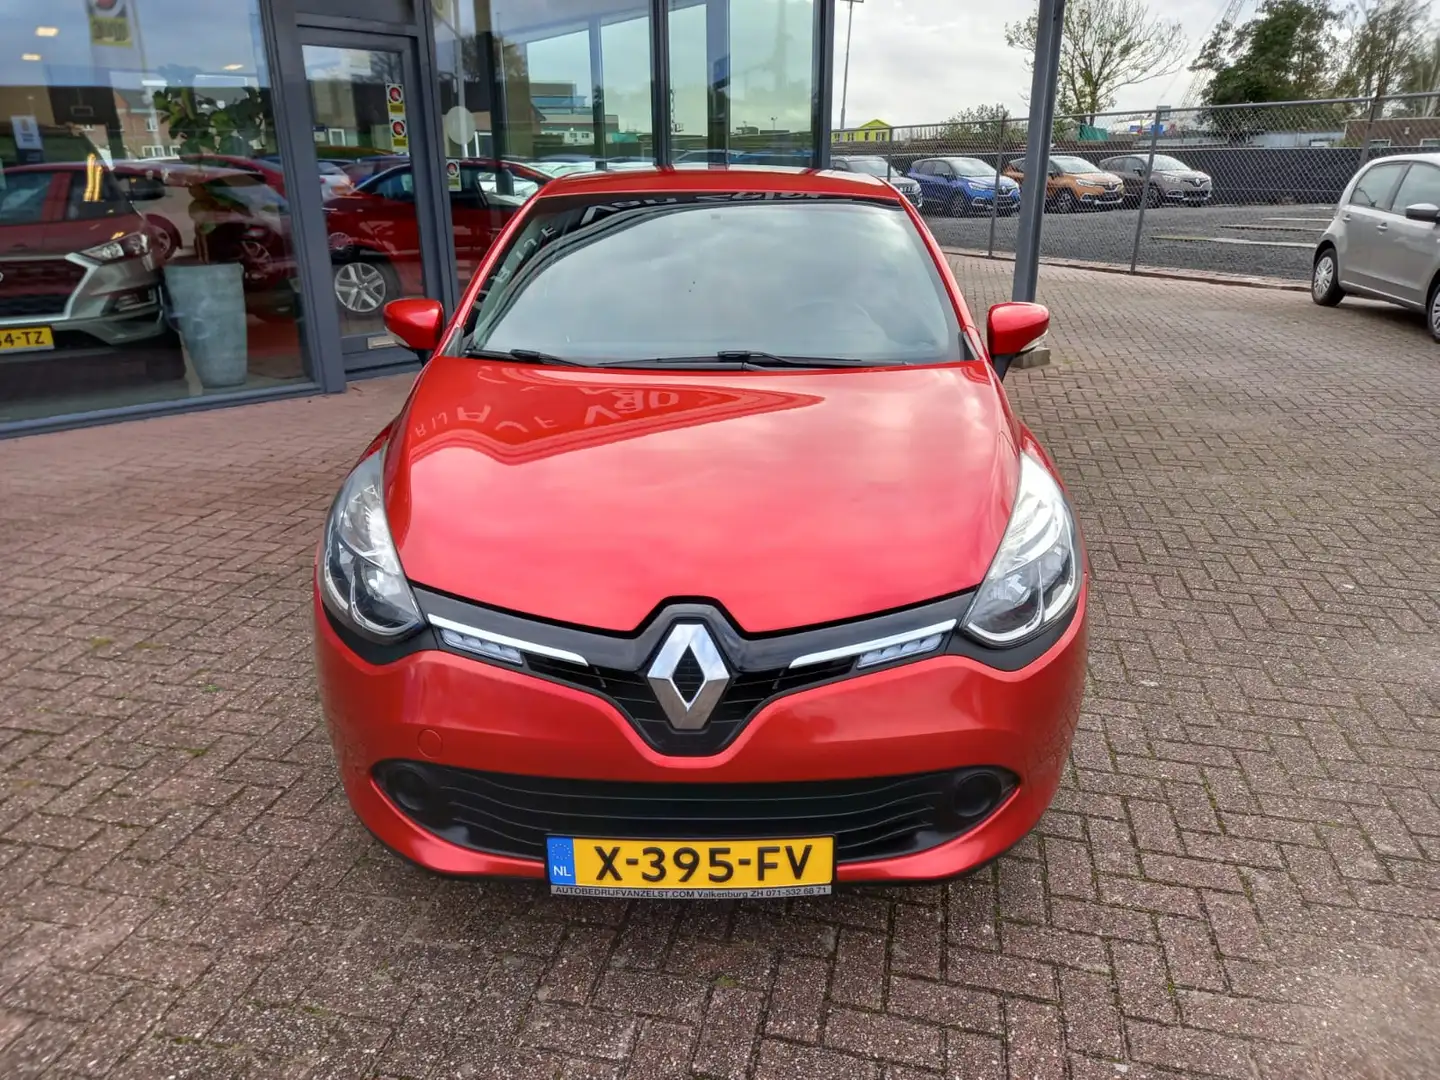 Renault Clio 1.2 Dynamique Automaat, Airco, Multimedia systeem, Rosso - 2